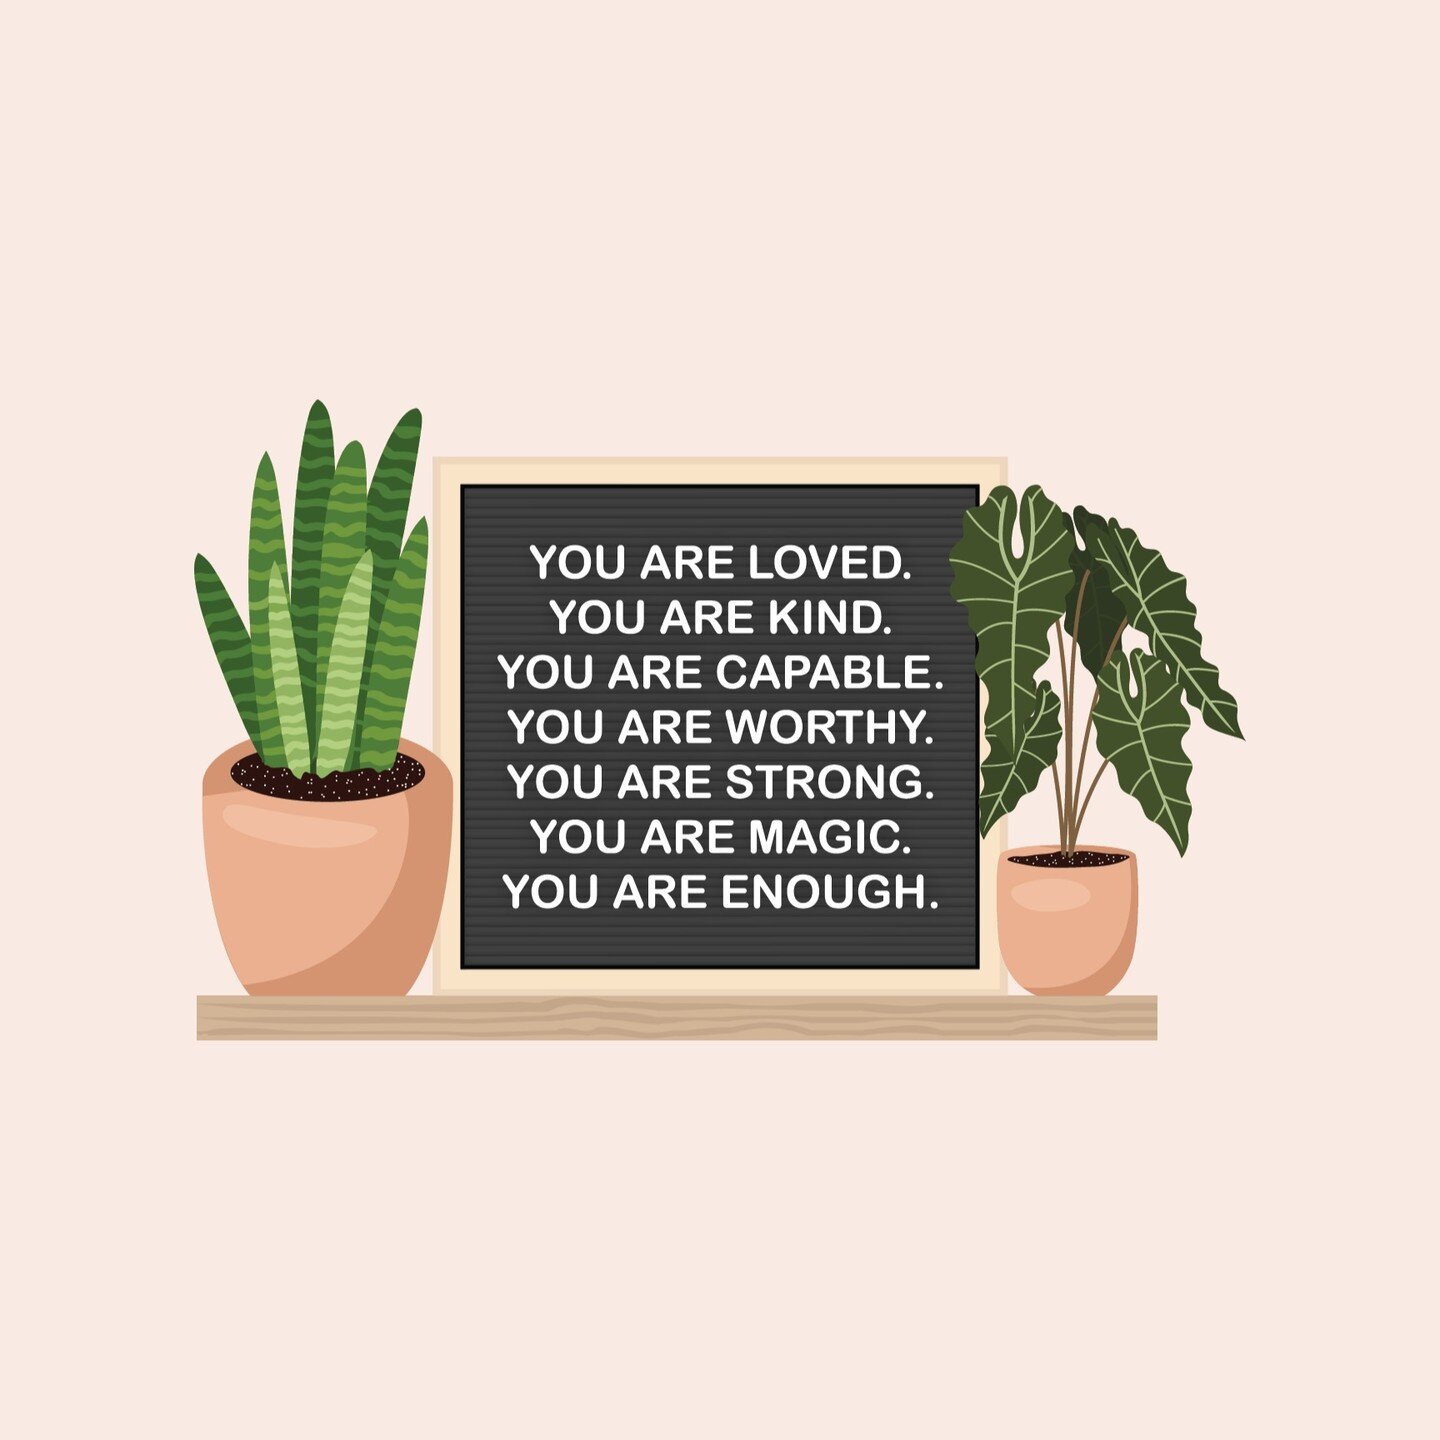 As we start a new week, it's important to remind ourselves of some fundamental truths: you are loved, you are strong, you are capable, and you are enough. 💖💪

In the hustle and bustle of life, it's easy to forget these simple yet profound affirmati